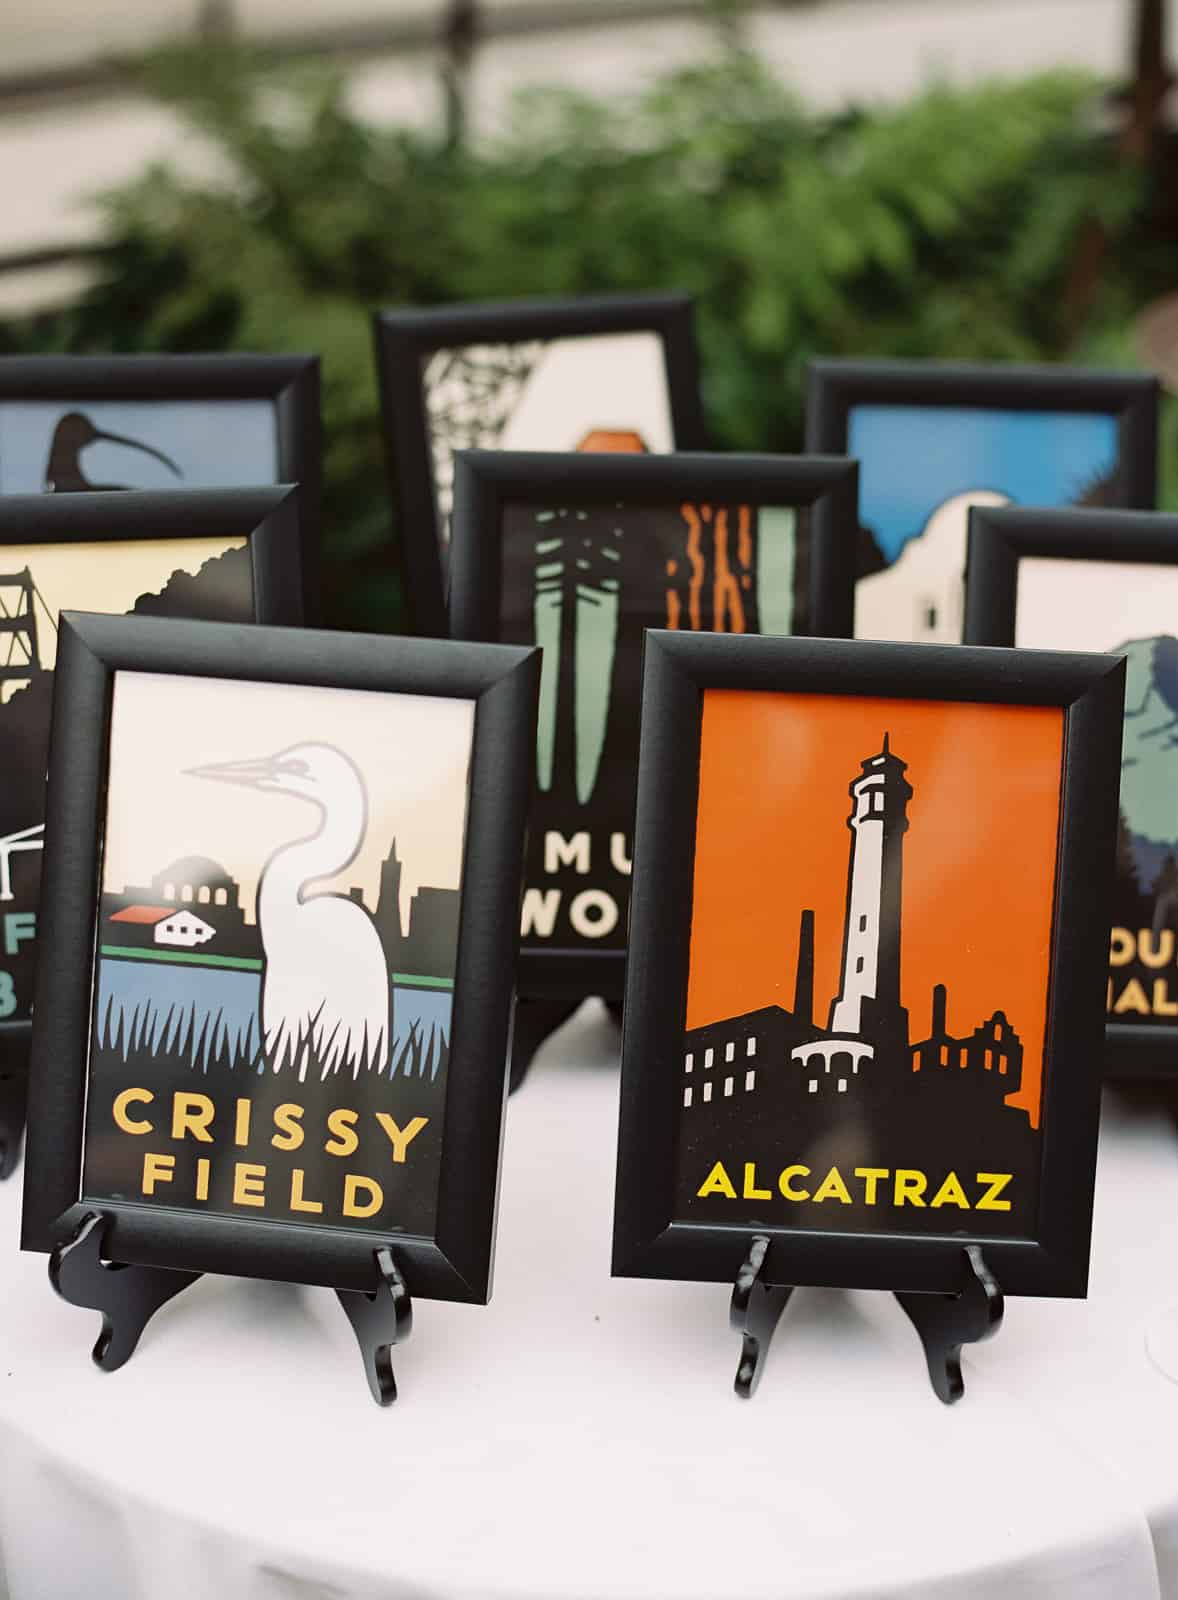 chrissy field and alcatraz illustrated table number art